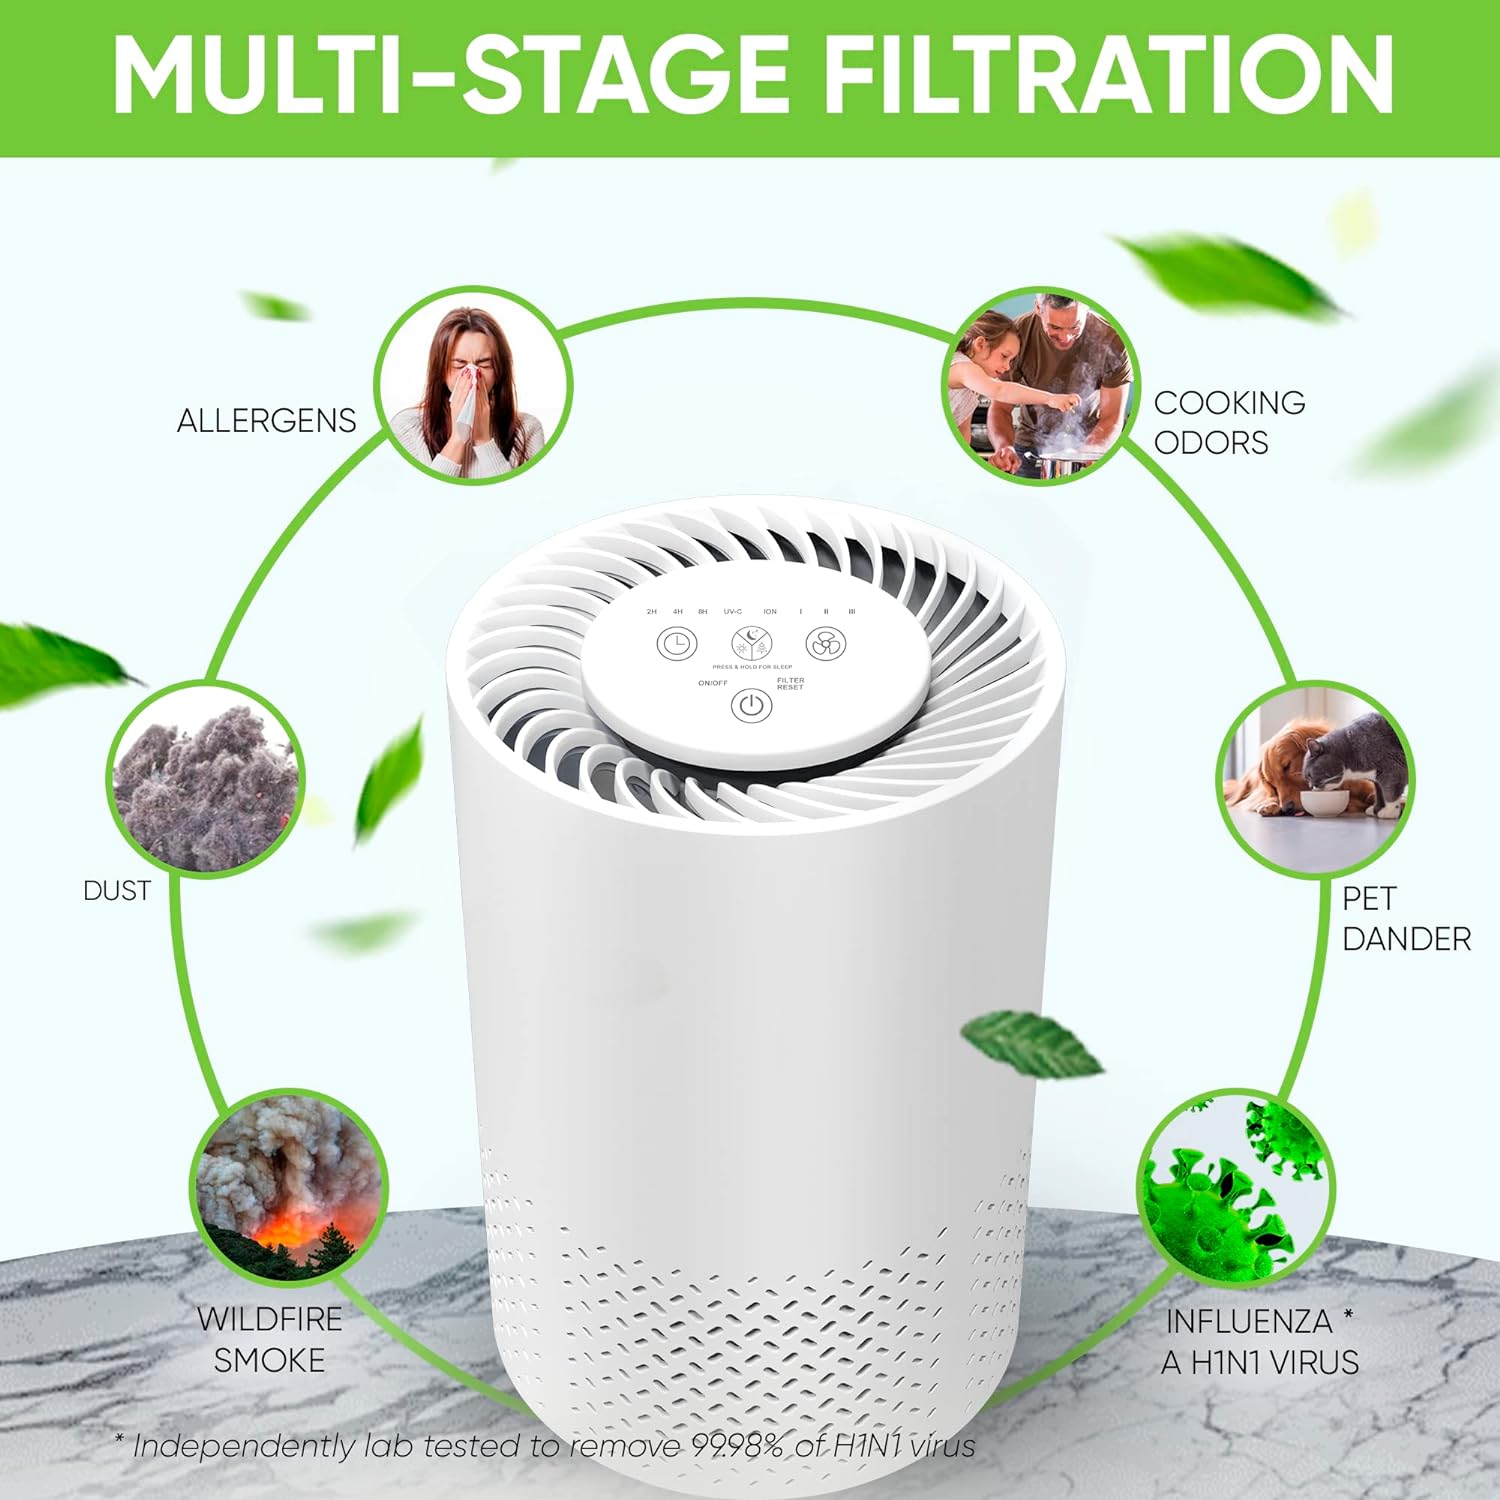 InvisiClean Stella HEPA Filter Air Purifier - Portable Desktop Air Purifier for Home - Odor Eliminating & Allergy Air Purifier for Baby Room & Bedroom with UV light + Negative Ion Generator/Ionizer